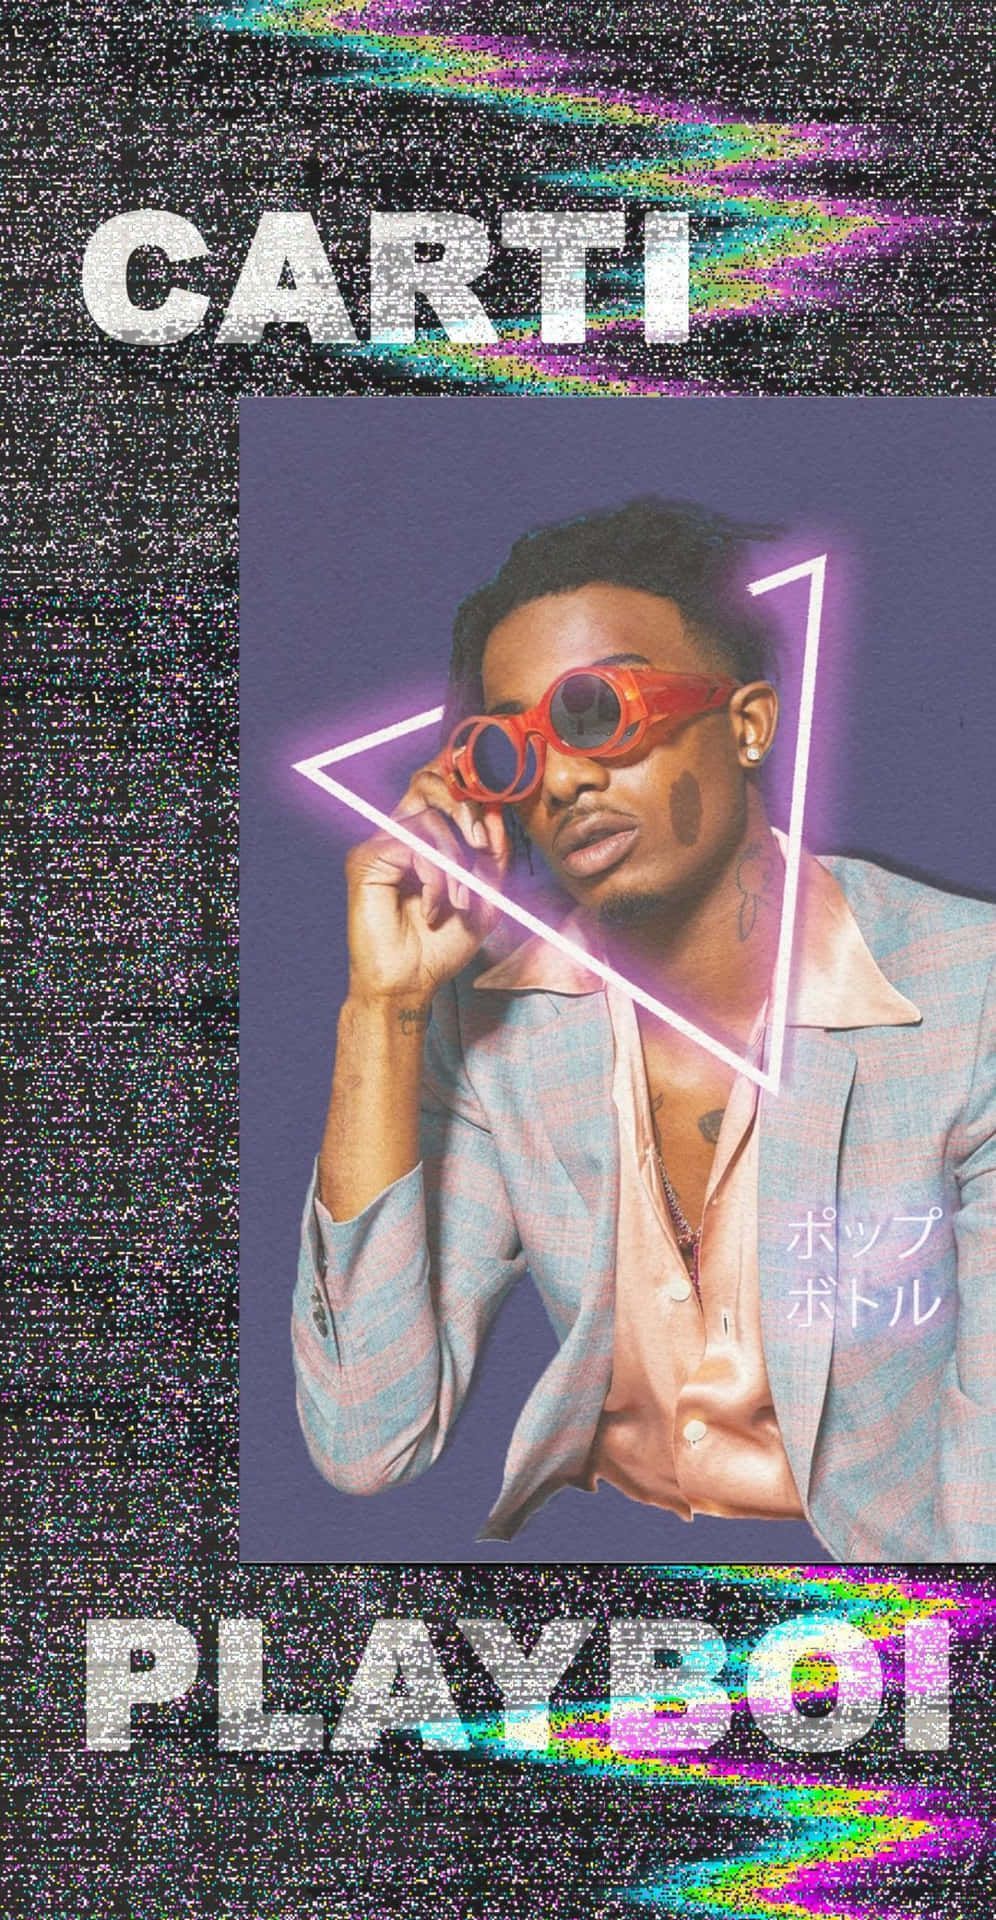 Download Playboi Carti mesmorizes as he fuses rap and hip hop with innovative beats. Wallpaper